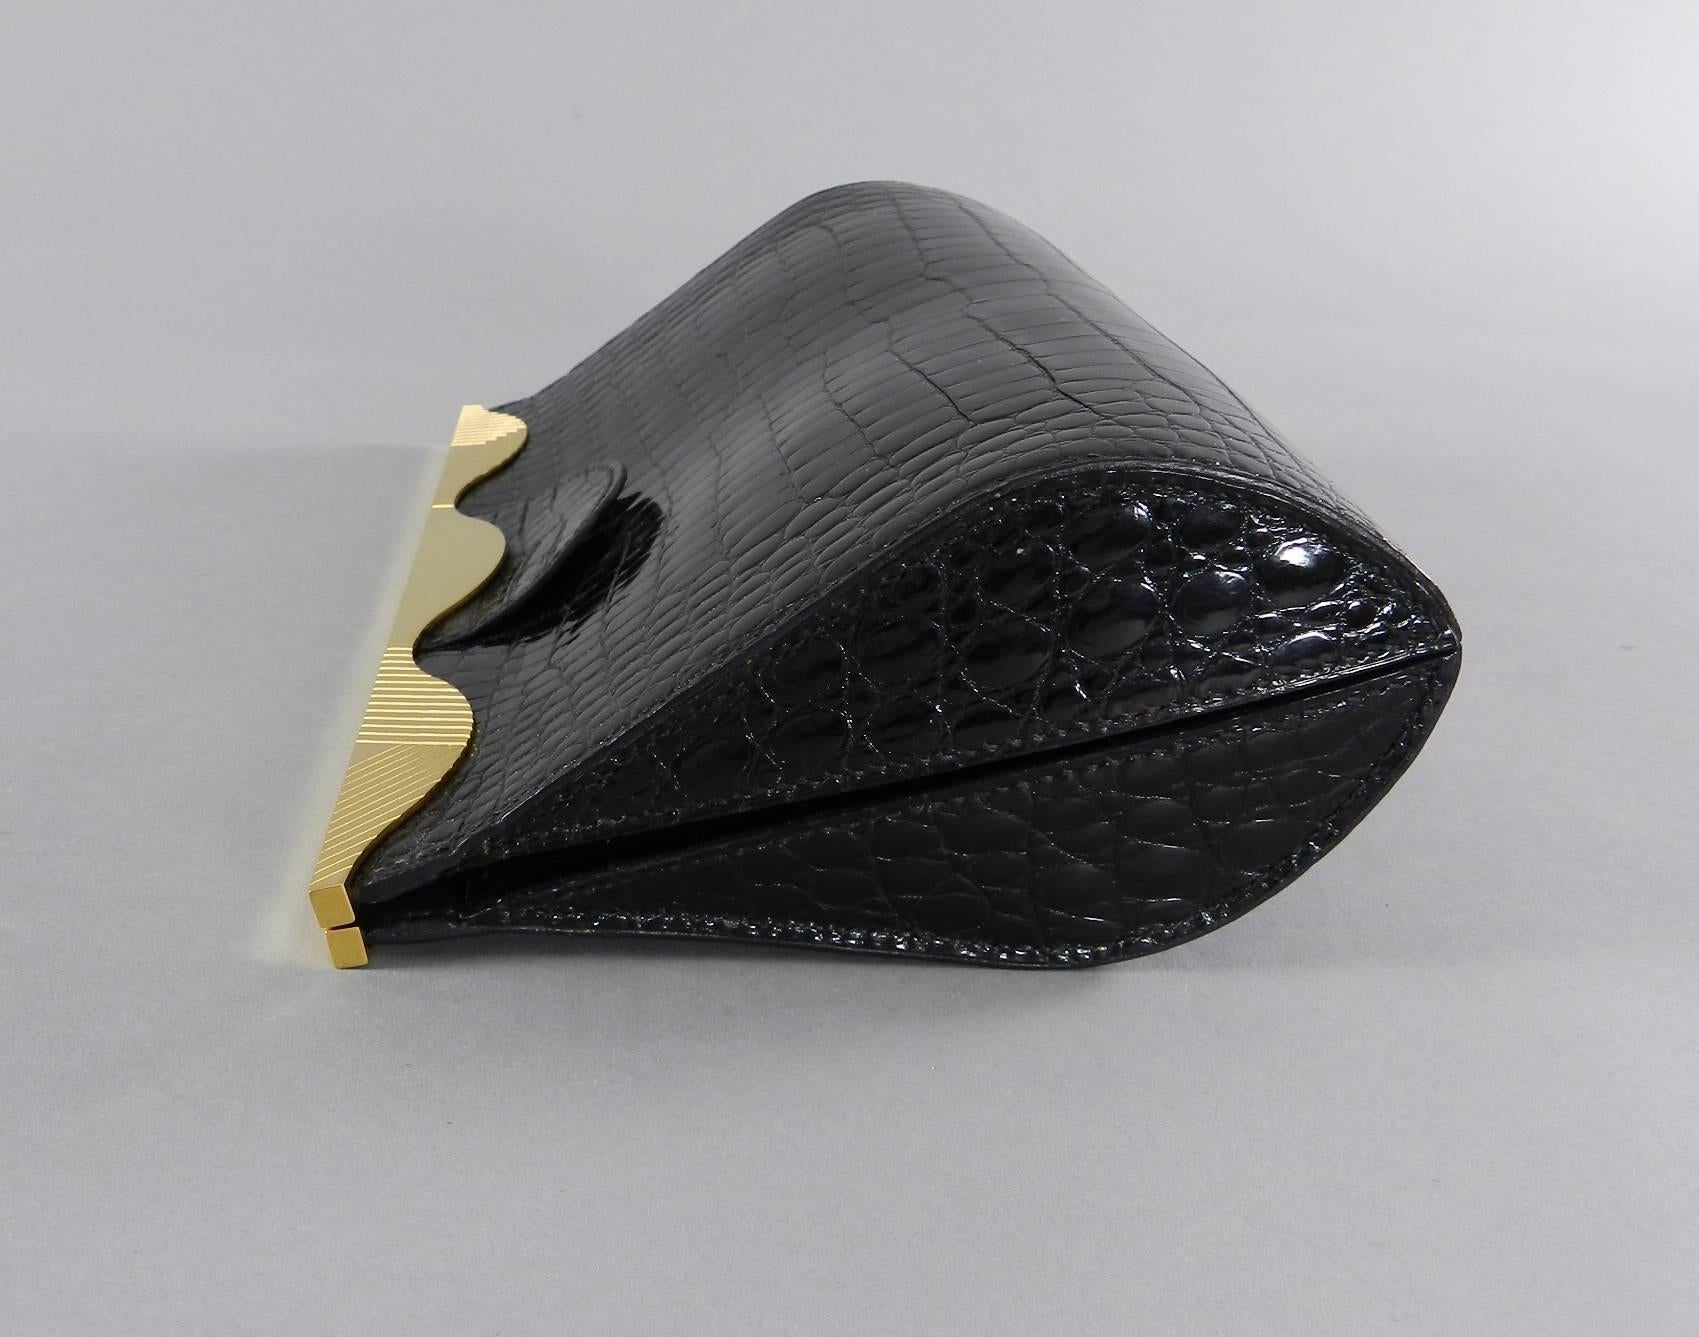 Hermes Vintage 1998 Limited Edition Black Crocodile Clutch with Gold Frame.  Sleek Art Deco design with scalloped 18k gold plated metal frame and glazed crocodile skin. Porosus crocodile marked ^.  Date stamp B in square for 1998.  Measures 23.5 x